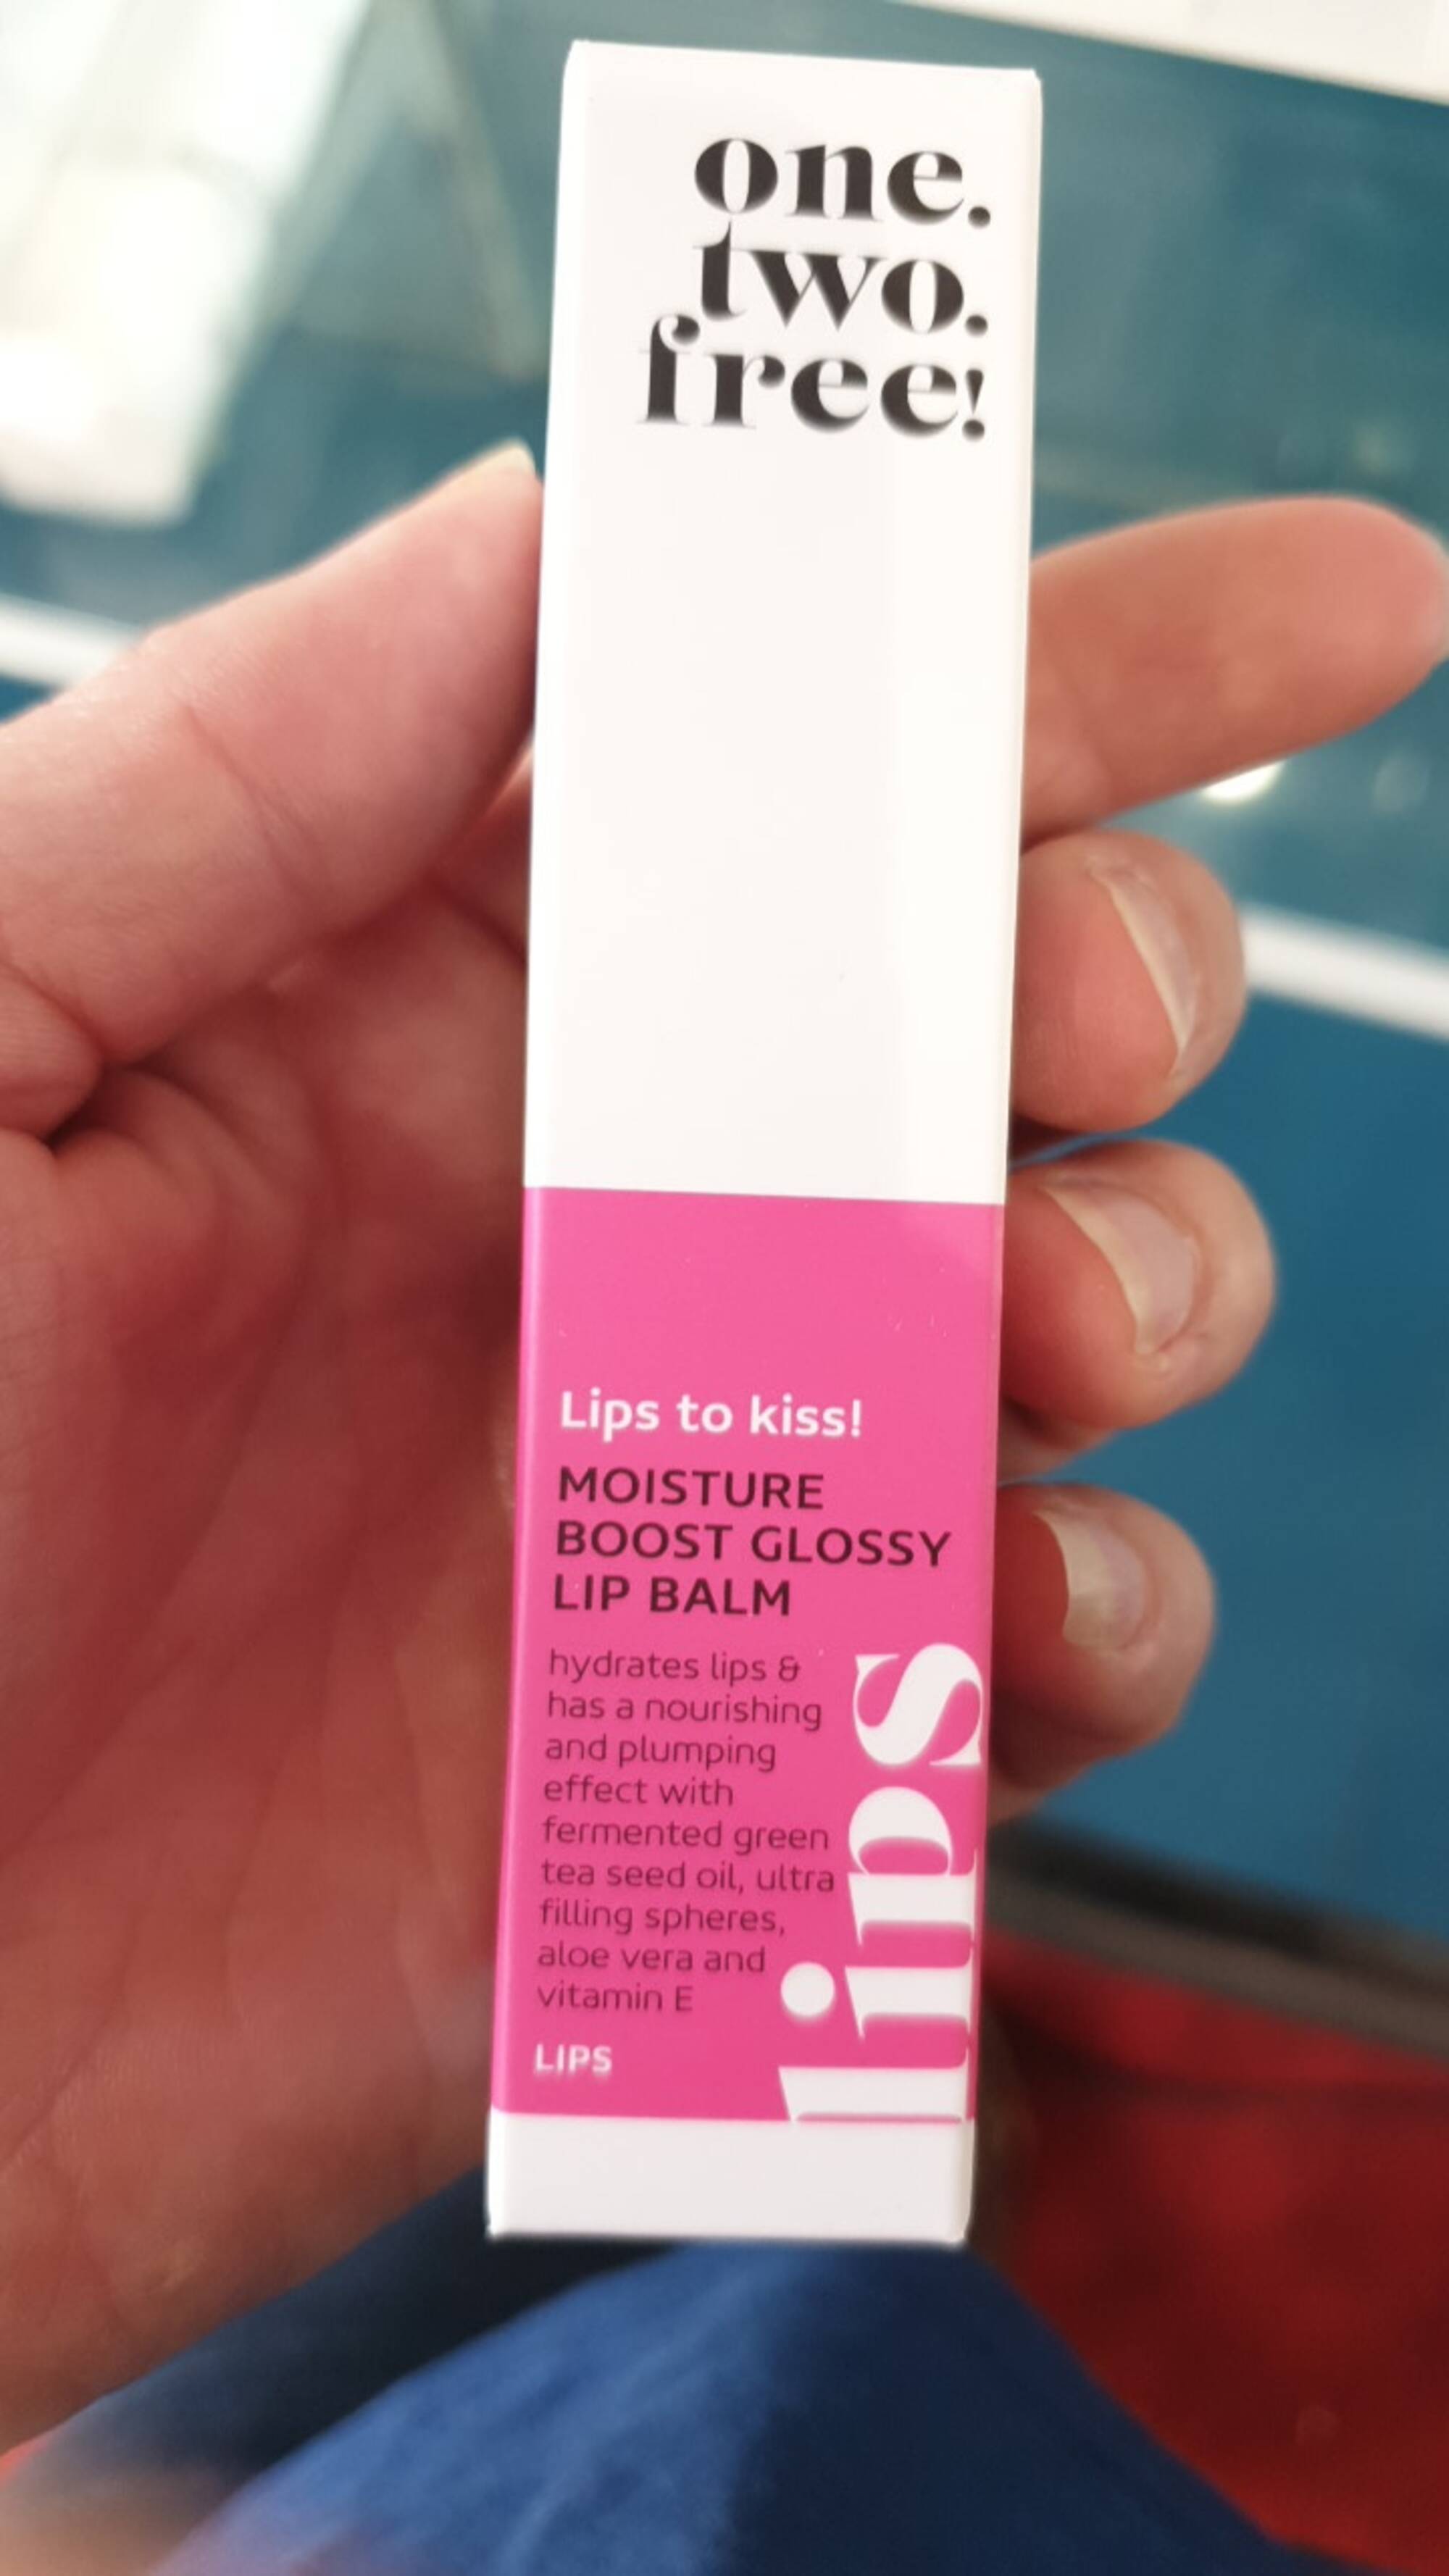 ONE.TWO.FREE! - Lips to kiss ! - Moisture boost glossy lip balm